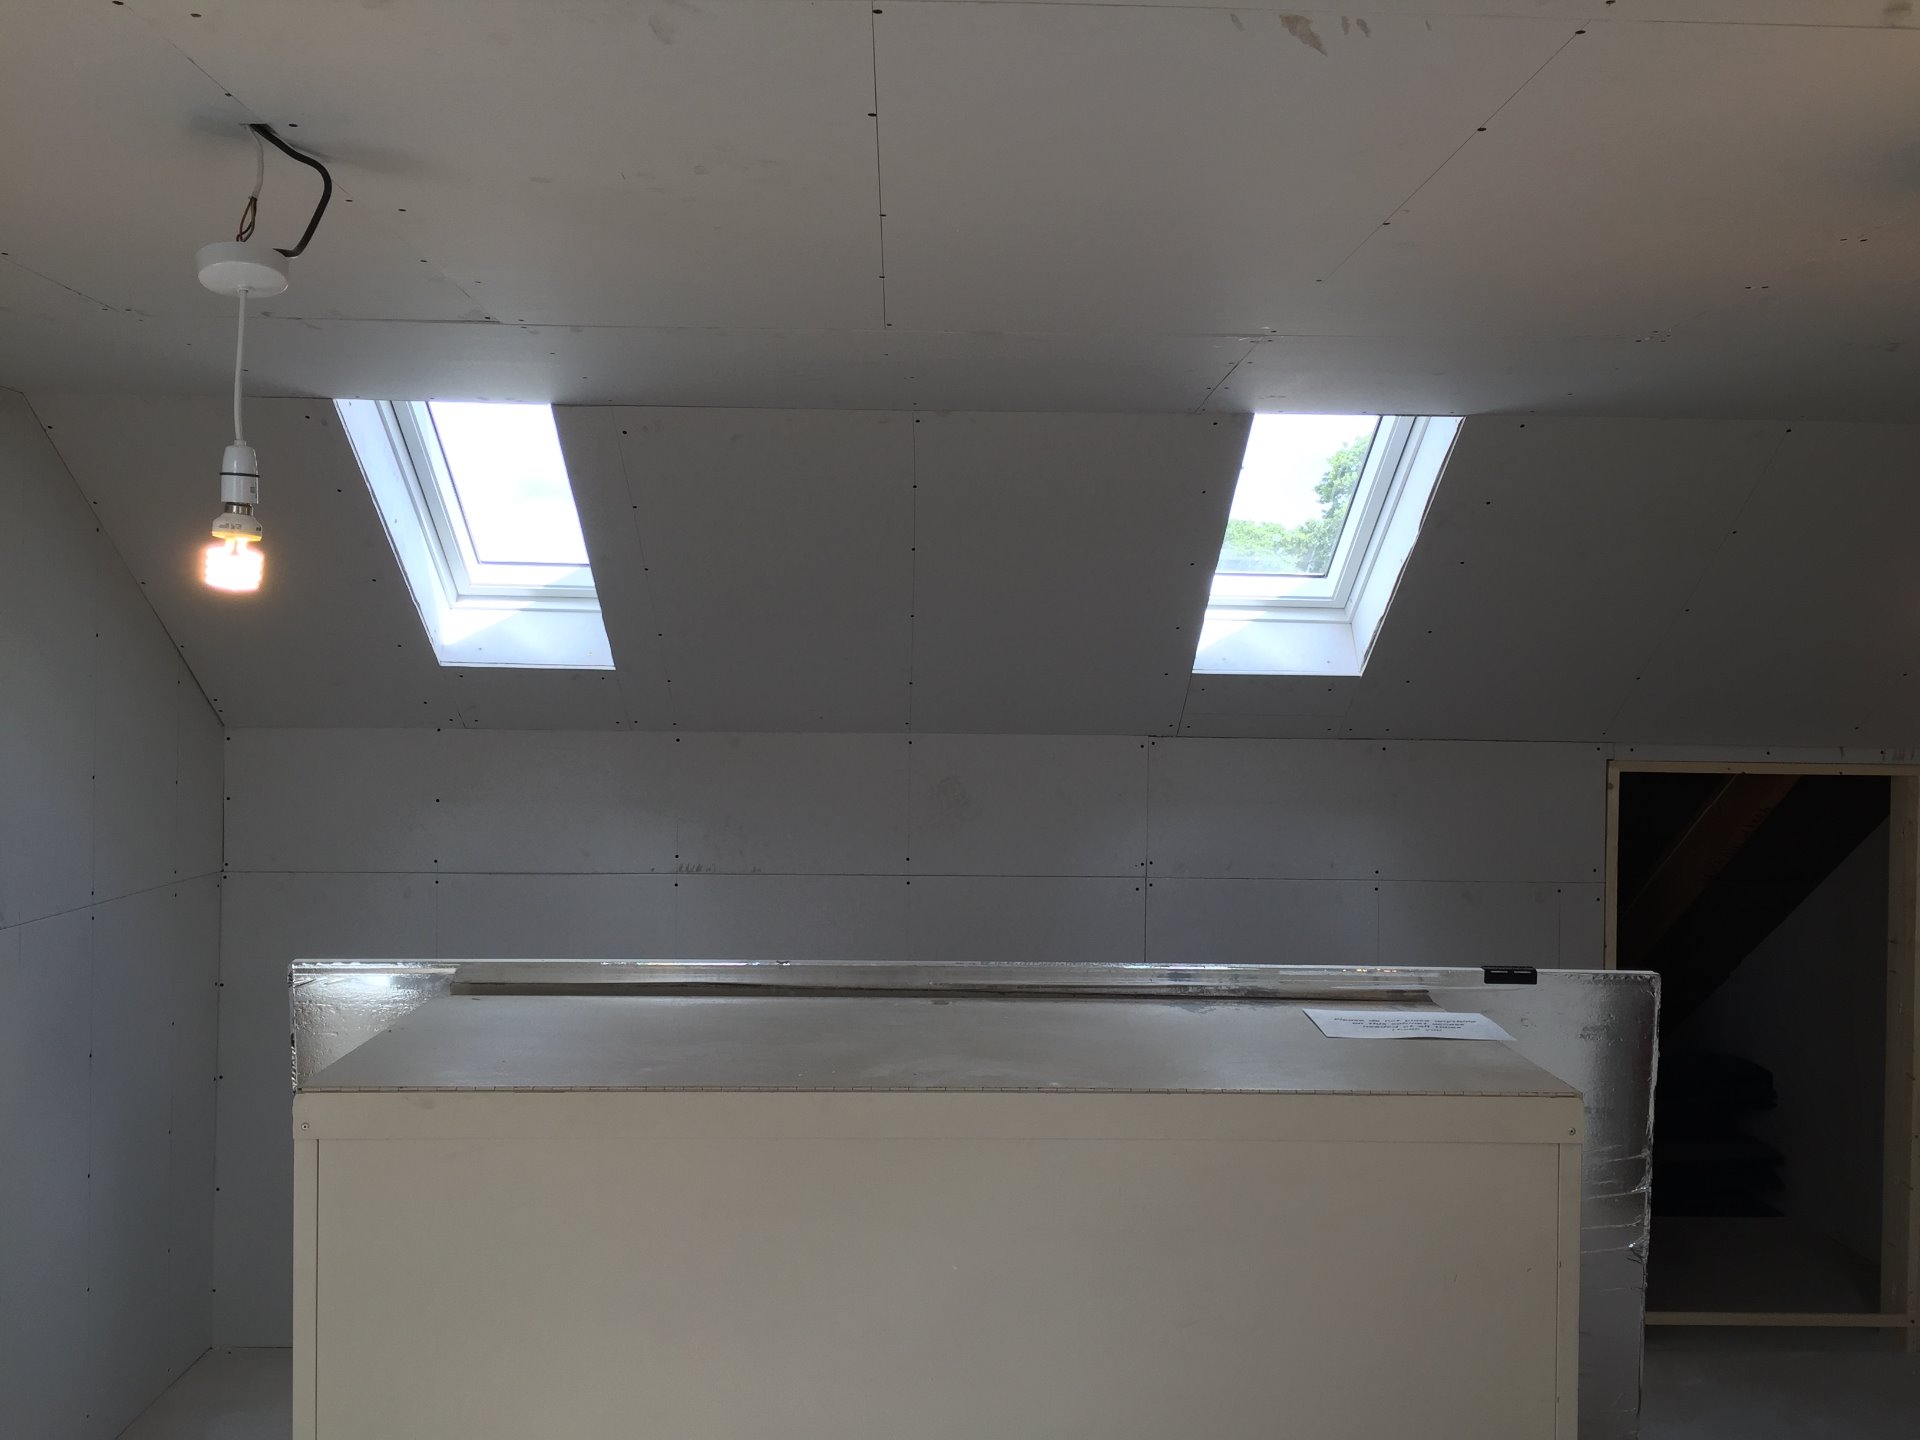 Velux windows were boarded with a splayed opening to enhance light in Devon